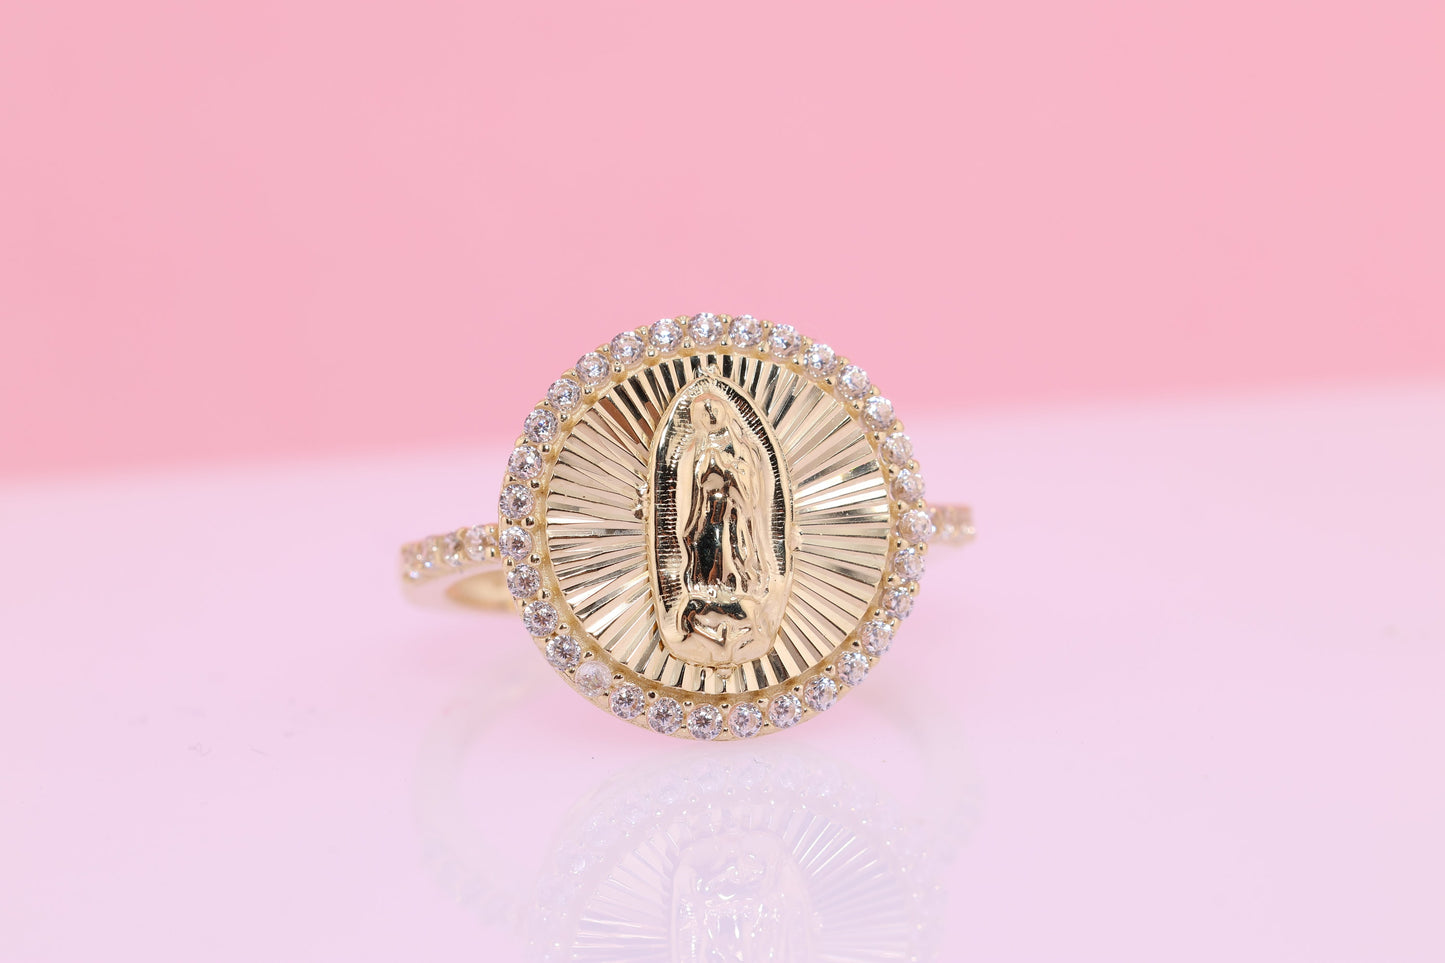 14k Solid Gold Virgin Mary Virgen Maria Lady Guadalupe Ring W